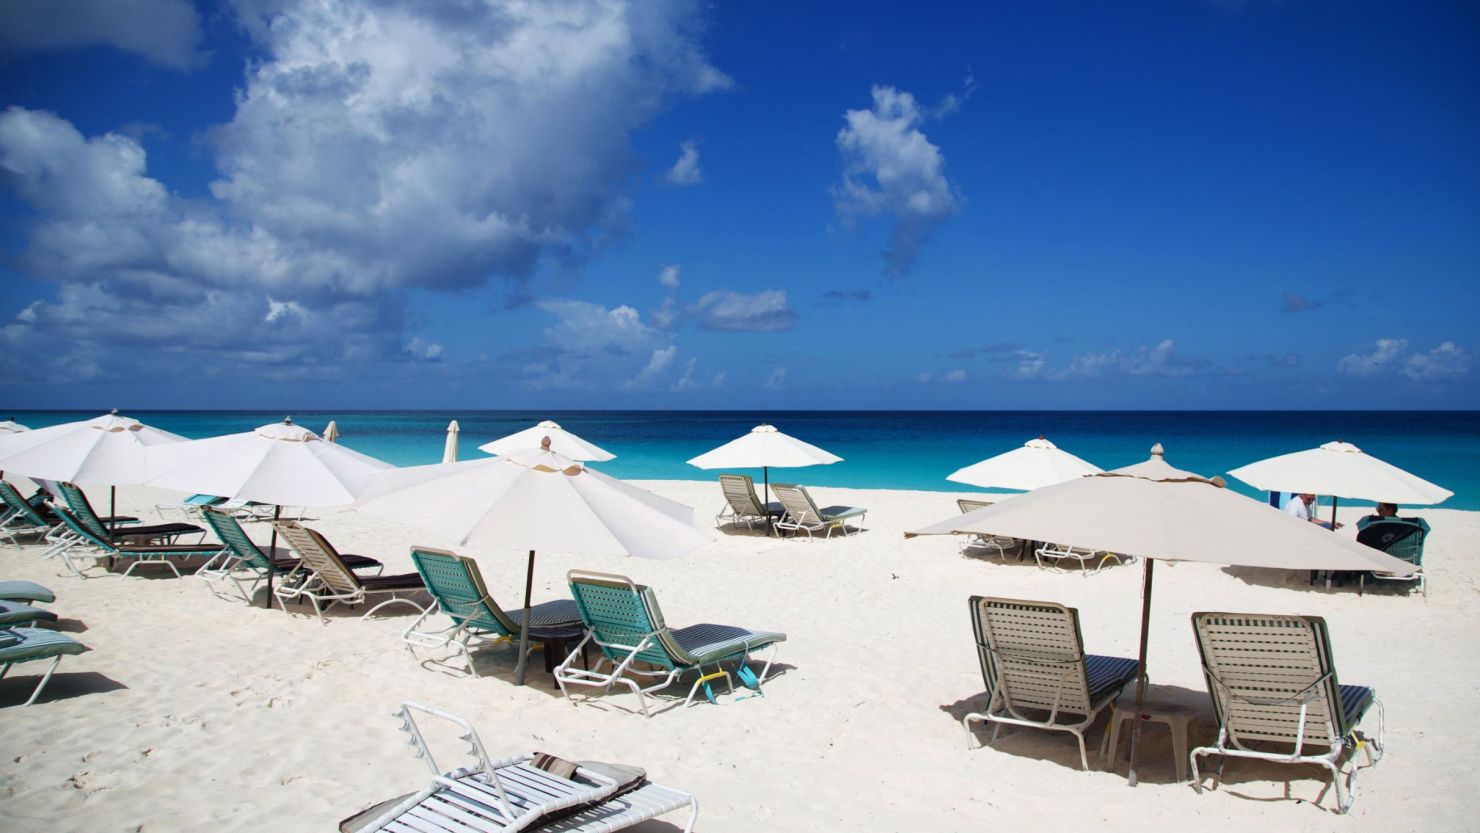 A picture taken on October 23, 2018 shows a beach in Anguilla, a British overseas territory. - The tiny Caribbean island of Anguilla lives in harmony with neighbouring Saint Martin but the borders could soon be going up in this sun-soaked paradise due to Brexit.
Five miles (eight kilometres) of turquoise sea separate the British overseas territory of Anguilla from Saint Martin, a larger island split between two European Union states: France in the northern half and the Dutch-run south. (Photo by Cedrick Isham CALVADOS / AFP)        (Photo credit should read CEDRICK ISHAM CALVADOS/AFP via Getty Images)